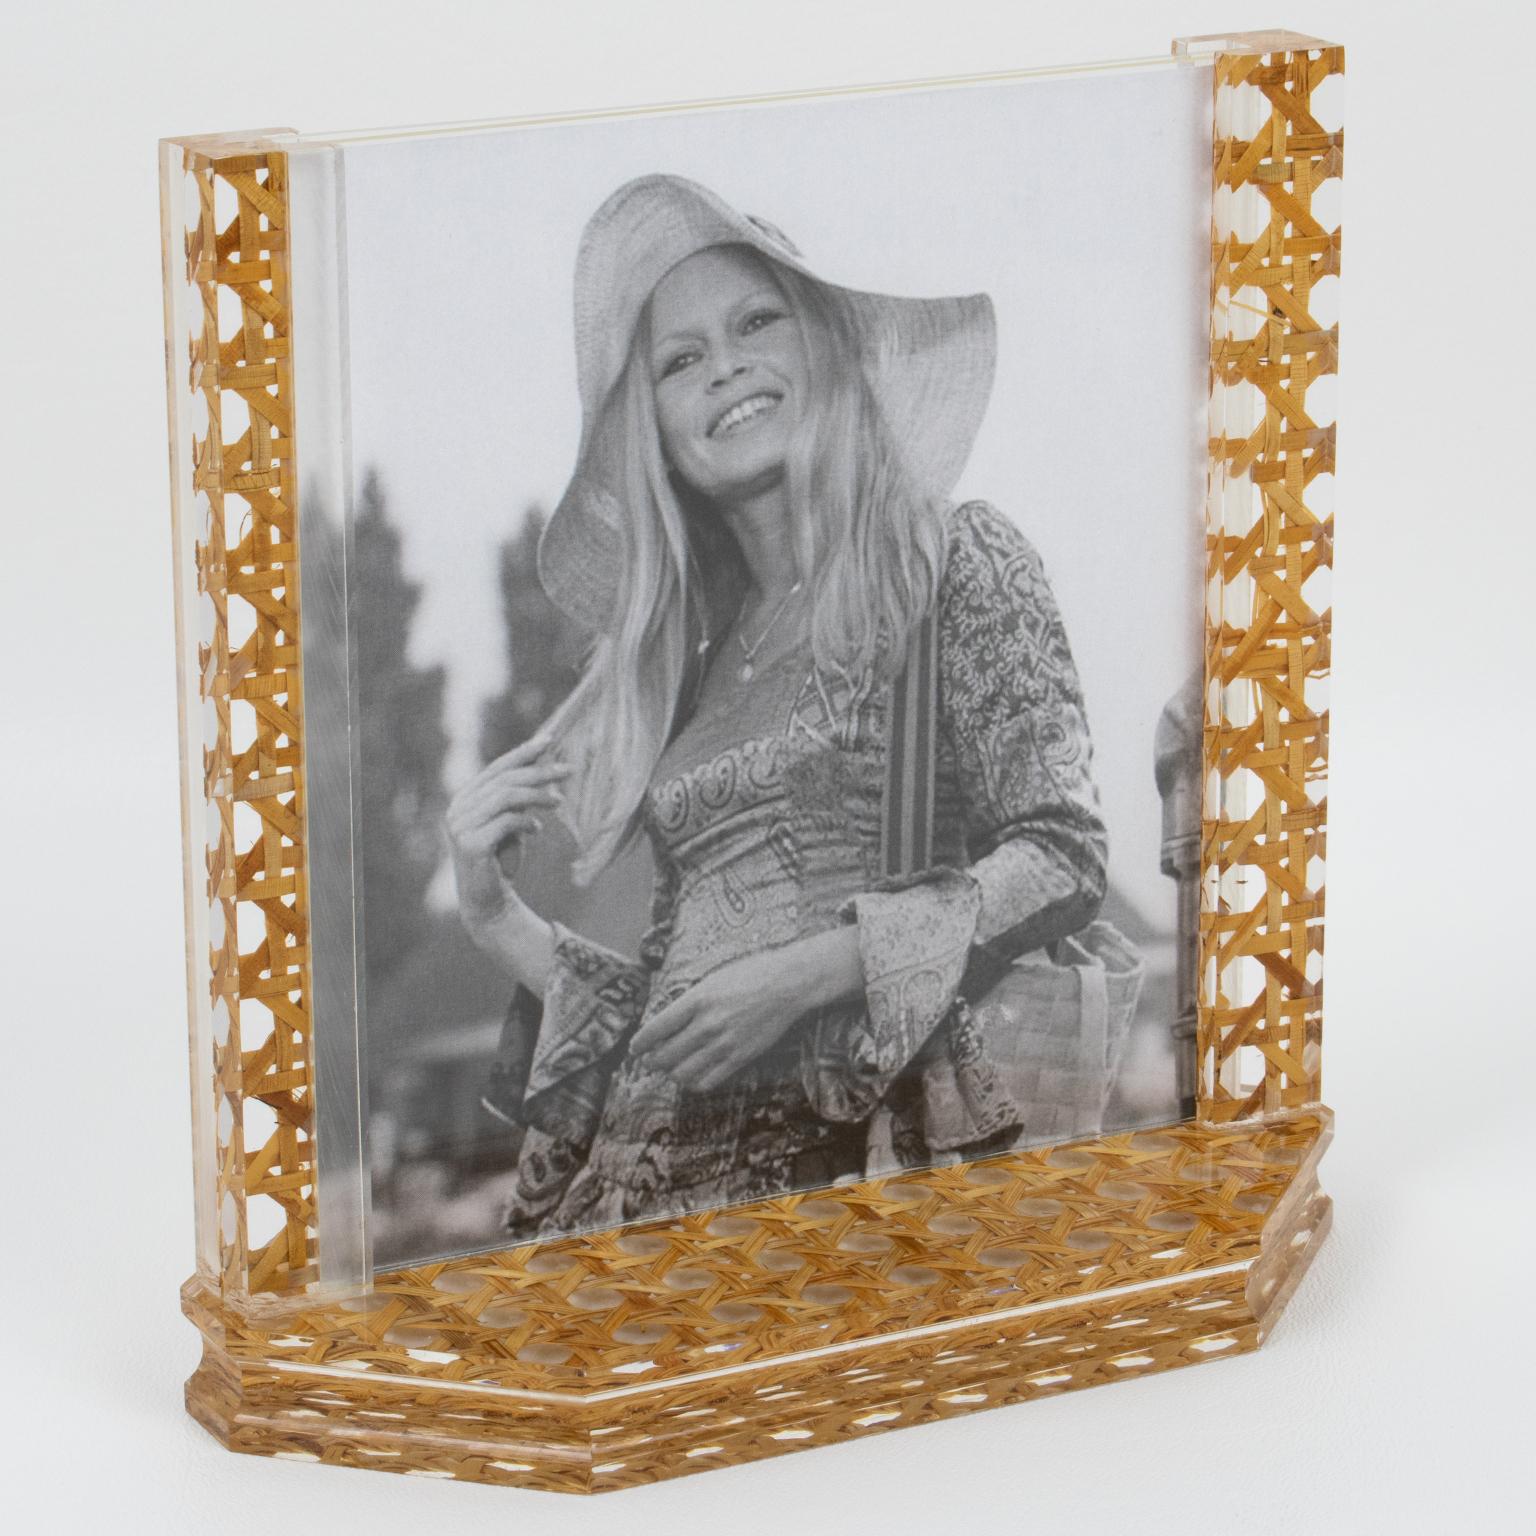 This lovely modernist picture photo frame was crafted in Italy in the 1970s. The piece boasts a hexagonal thick Lucite slab base with two tall holders. The frame is made of clear Lucite with genuine rattan, wicket, or cane work embedded in the